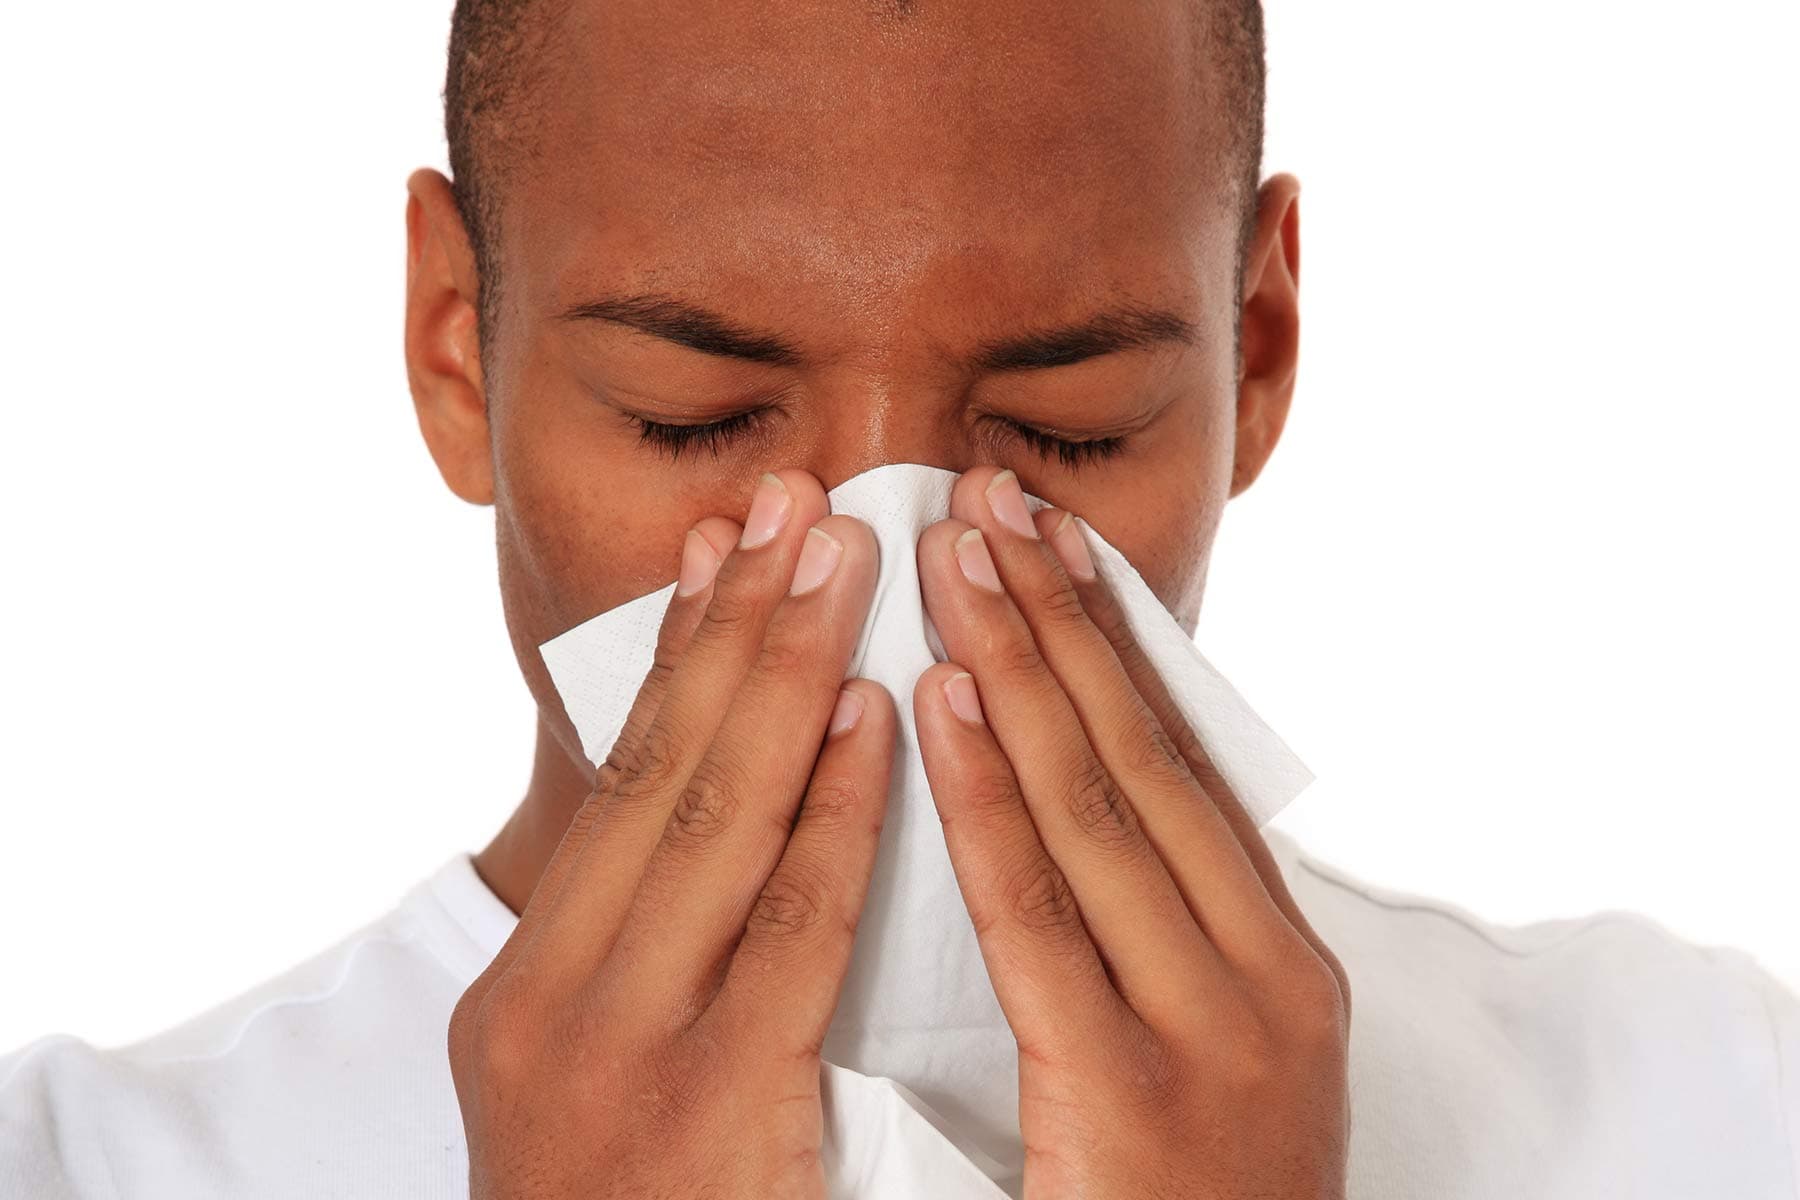 Your Job Could Put You at Much Higher Risk for Flu